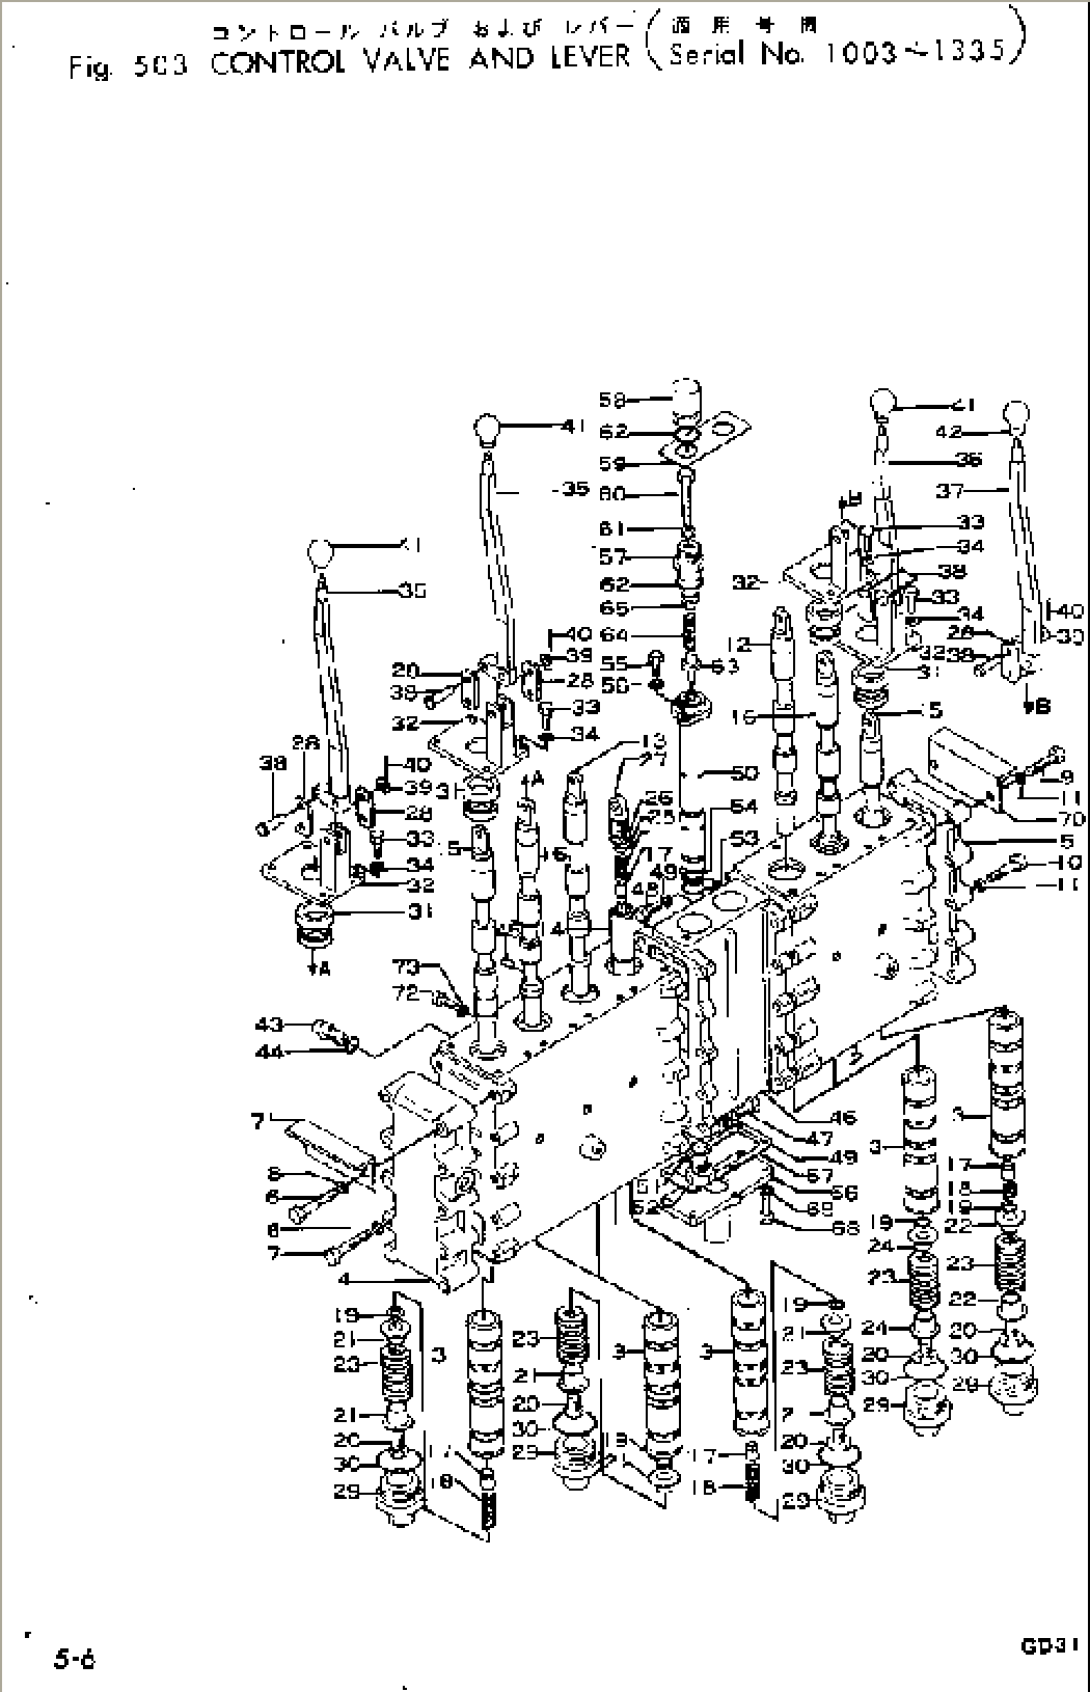 CONTROL VALVE AND LEVER(#1003-1335)